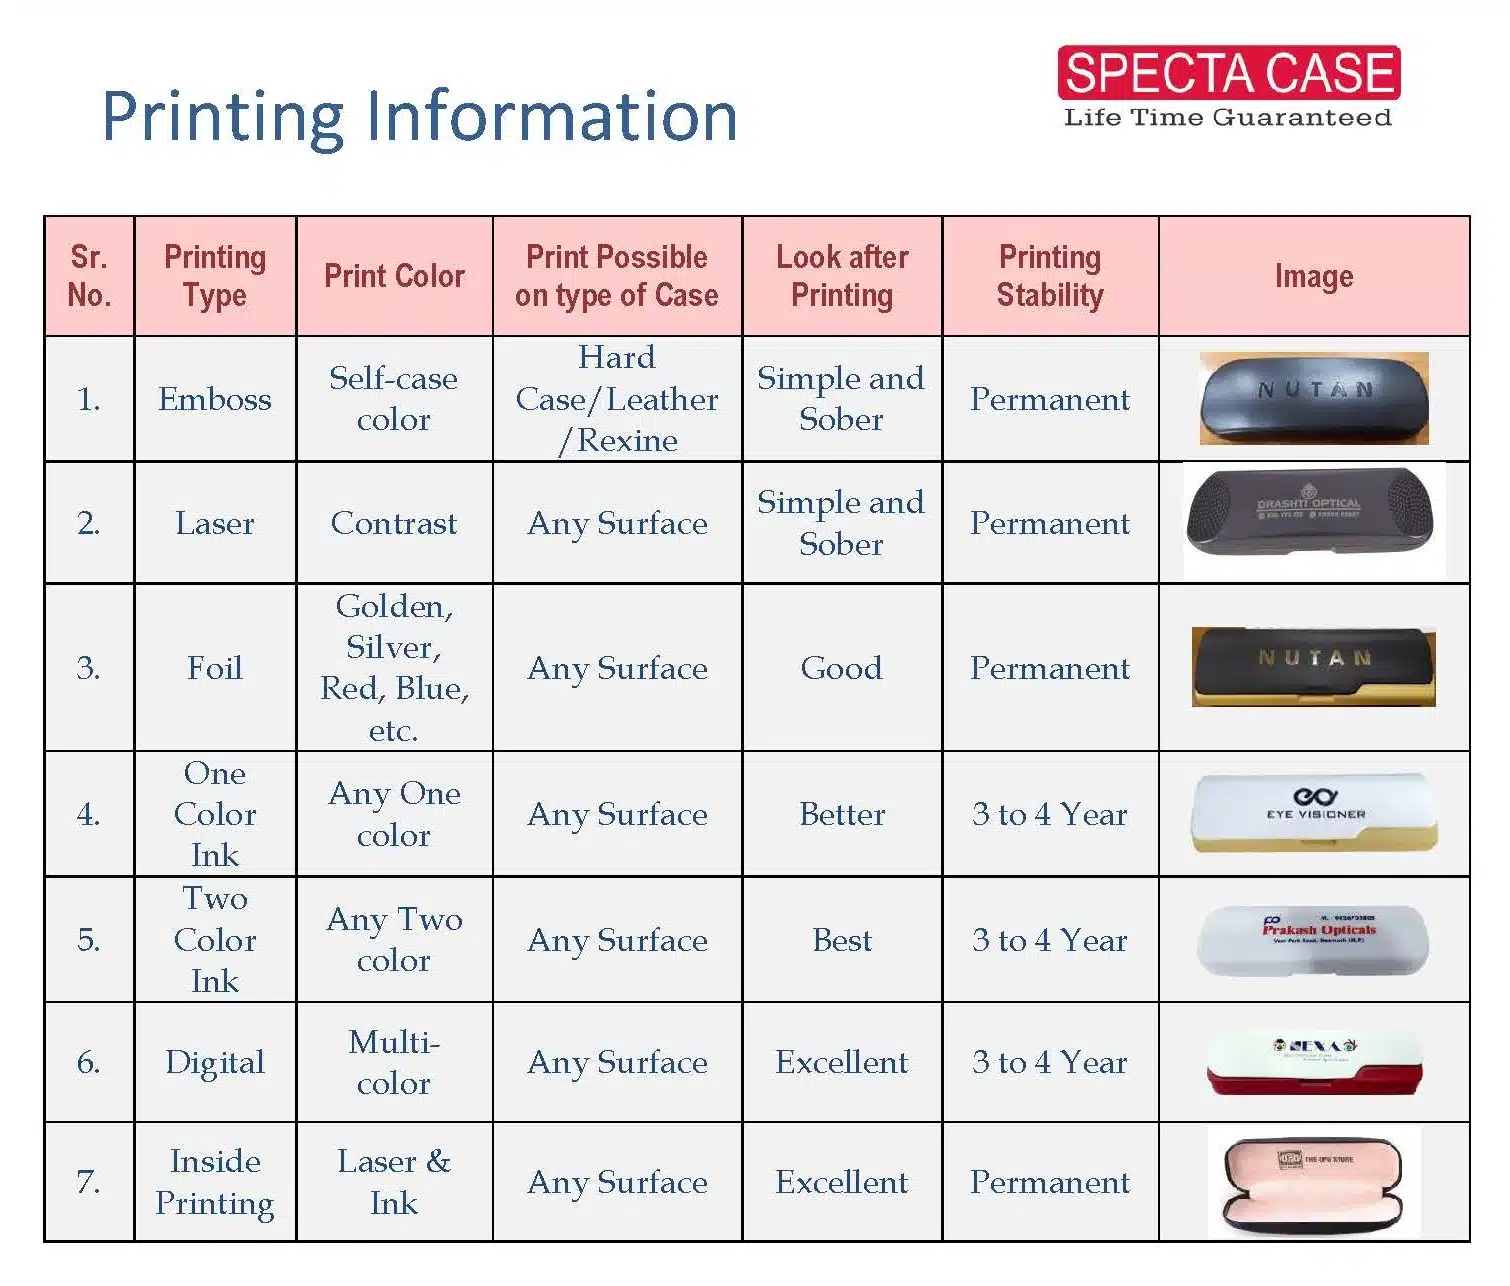 Different types of printing services